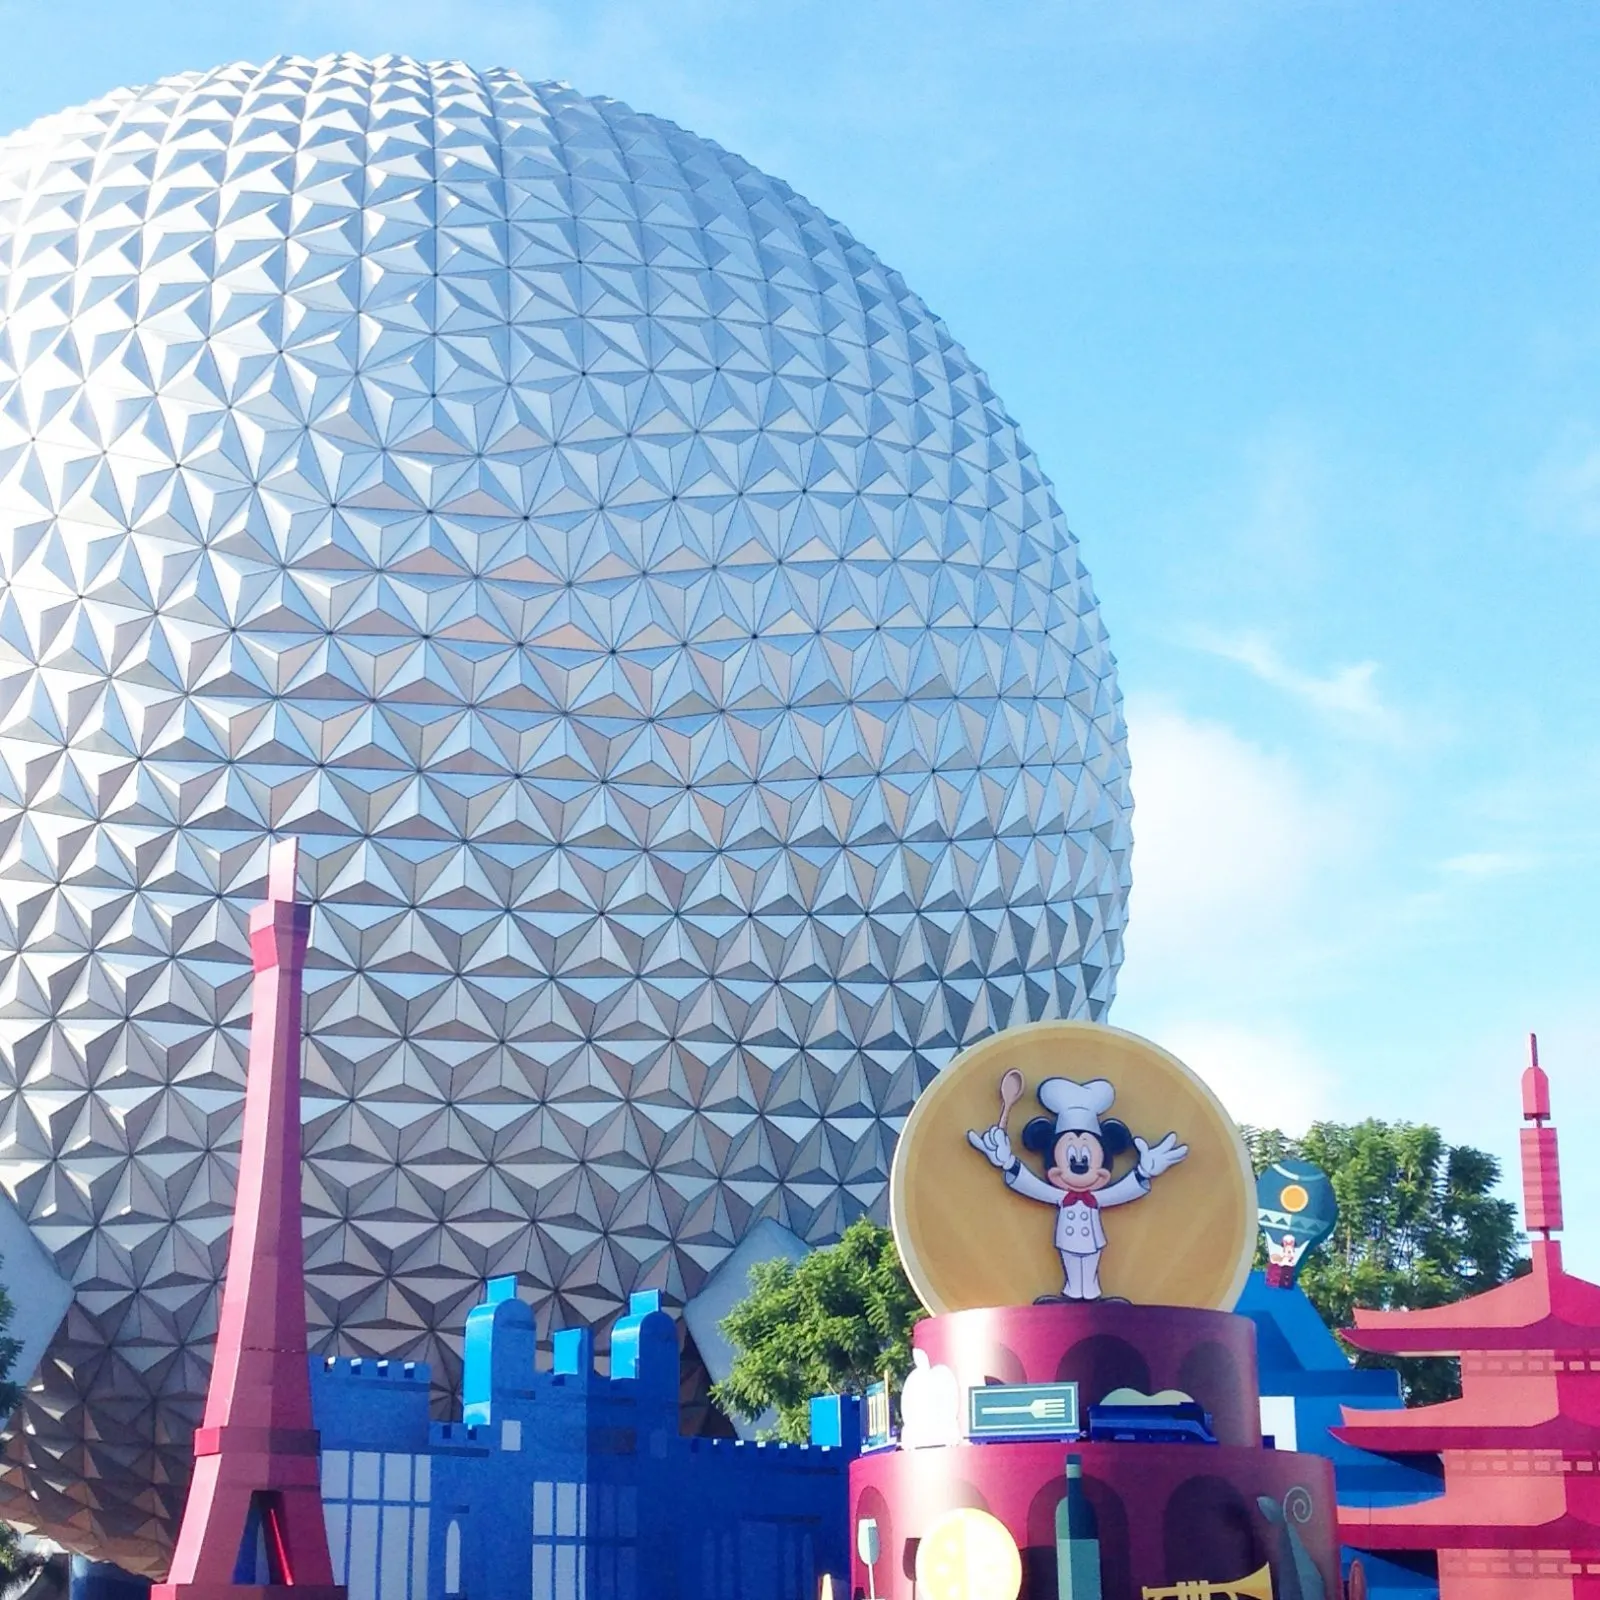 Epcot Food And Wine Festival Tips & Tricks - The Frugal South